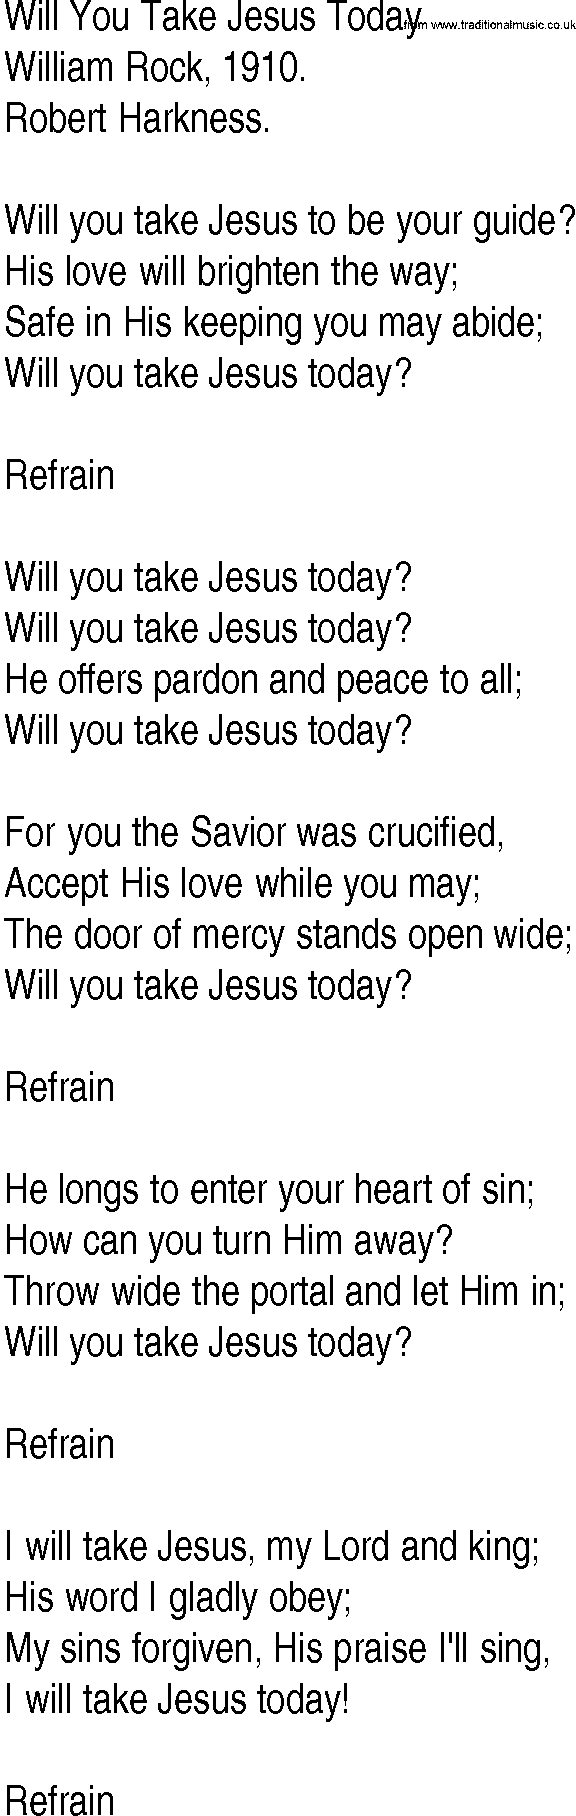 Hymn and Gospel Song: Will You Take Jesus Today by William Rock lyrics